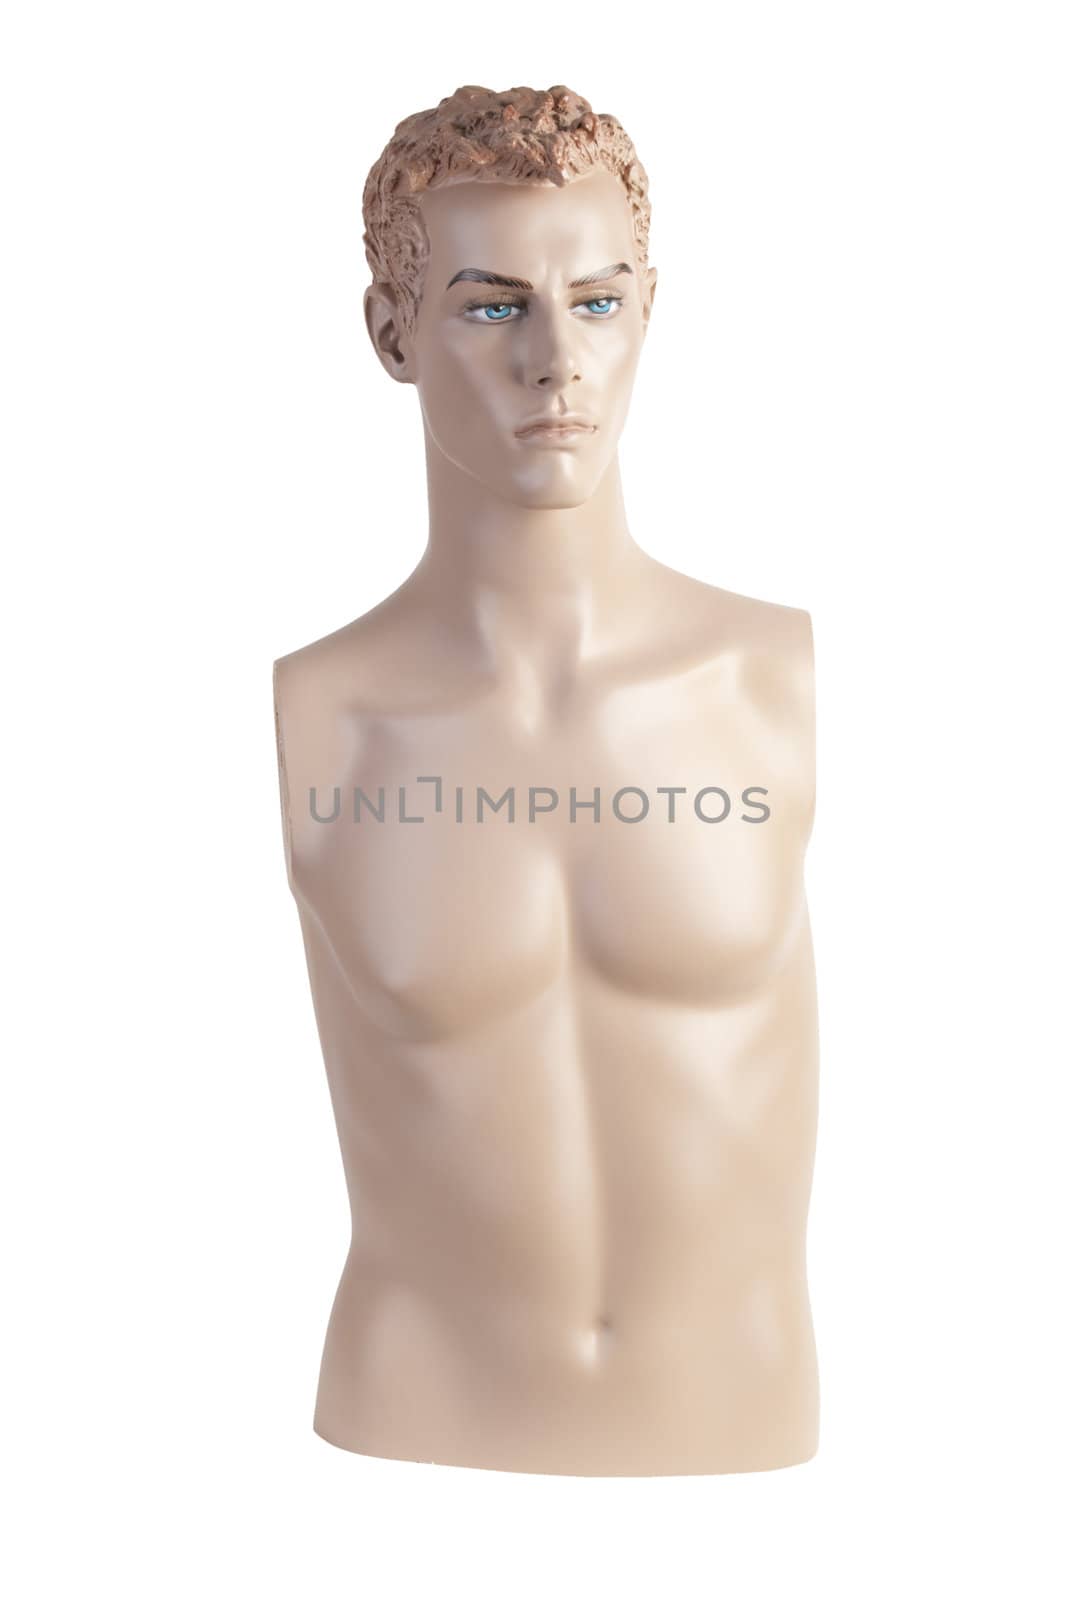 Plastic male detailed dummy torso and head. Isolated on white background